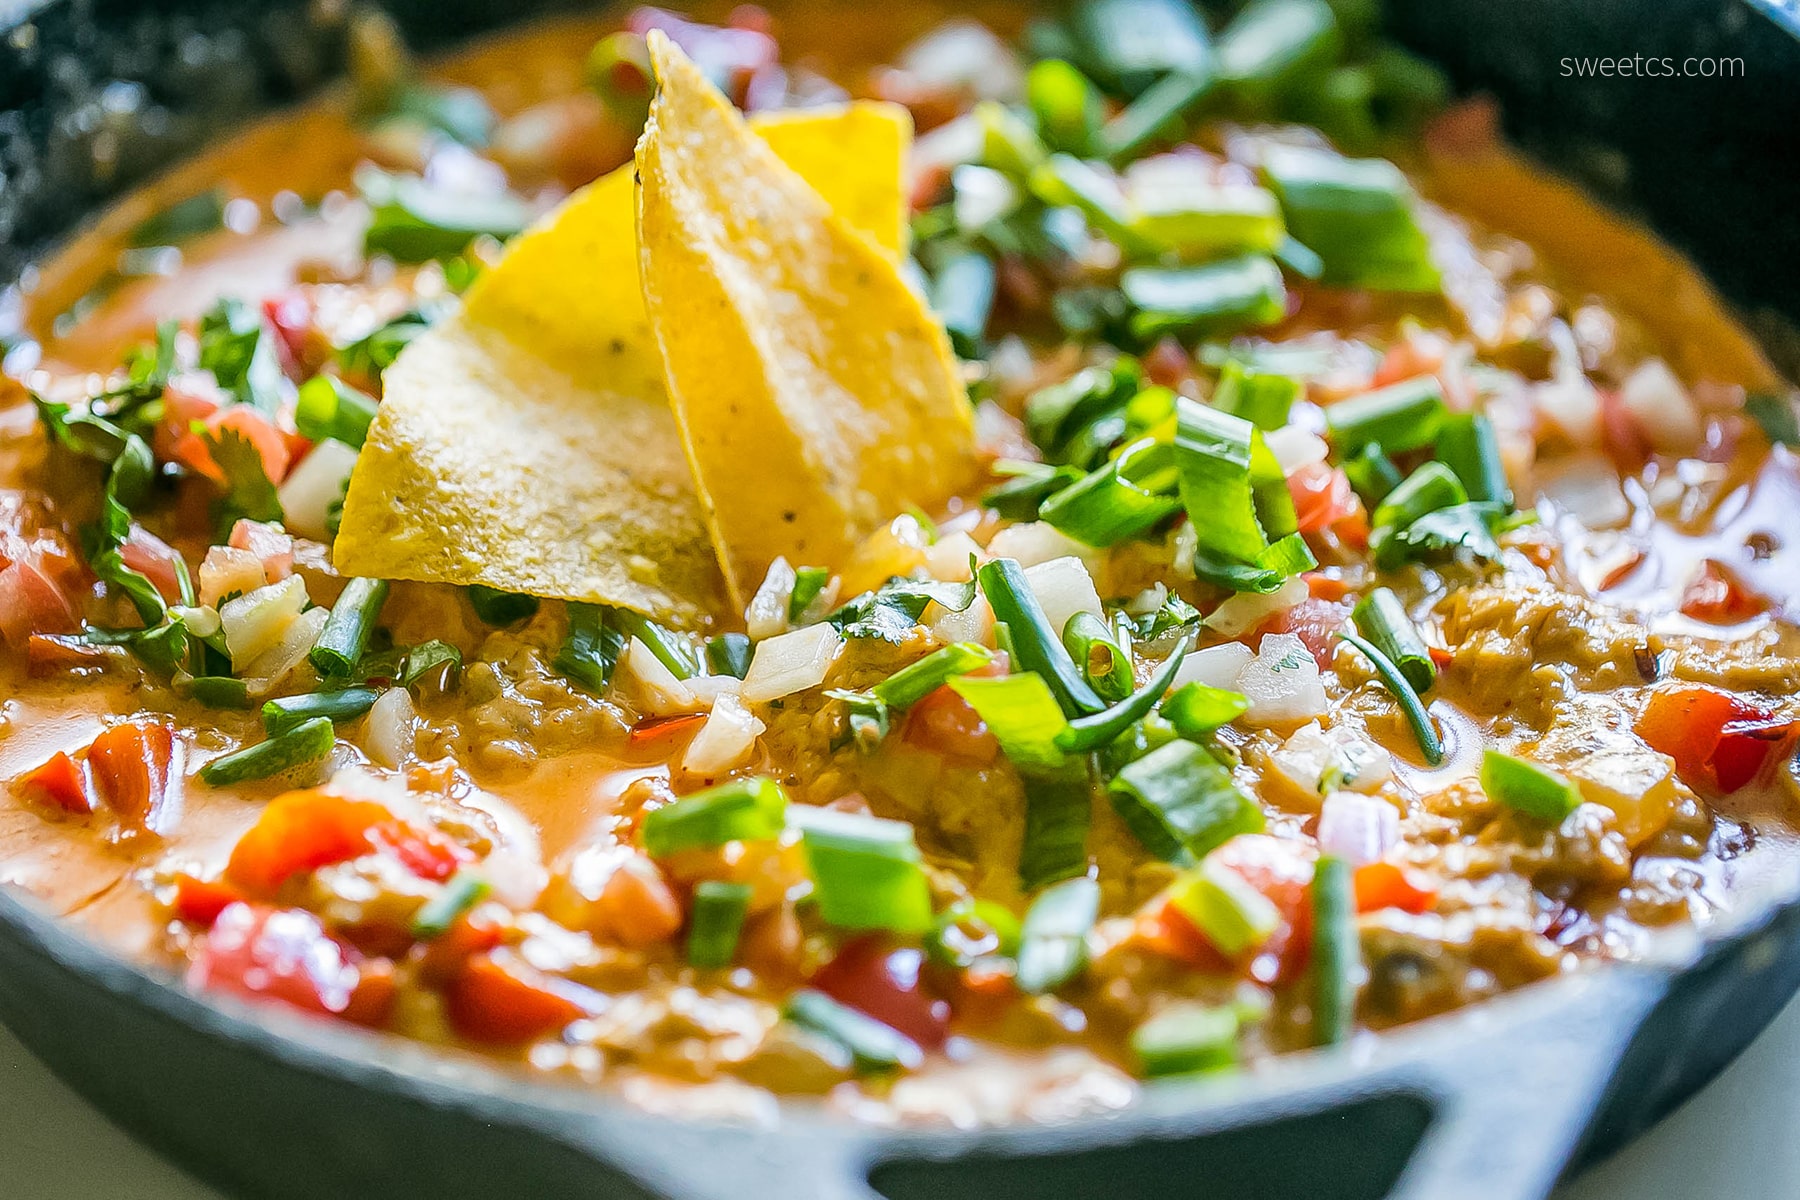 This enchilada dip is a perfect appetizer- so filling and delicious!